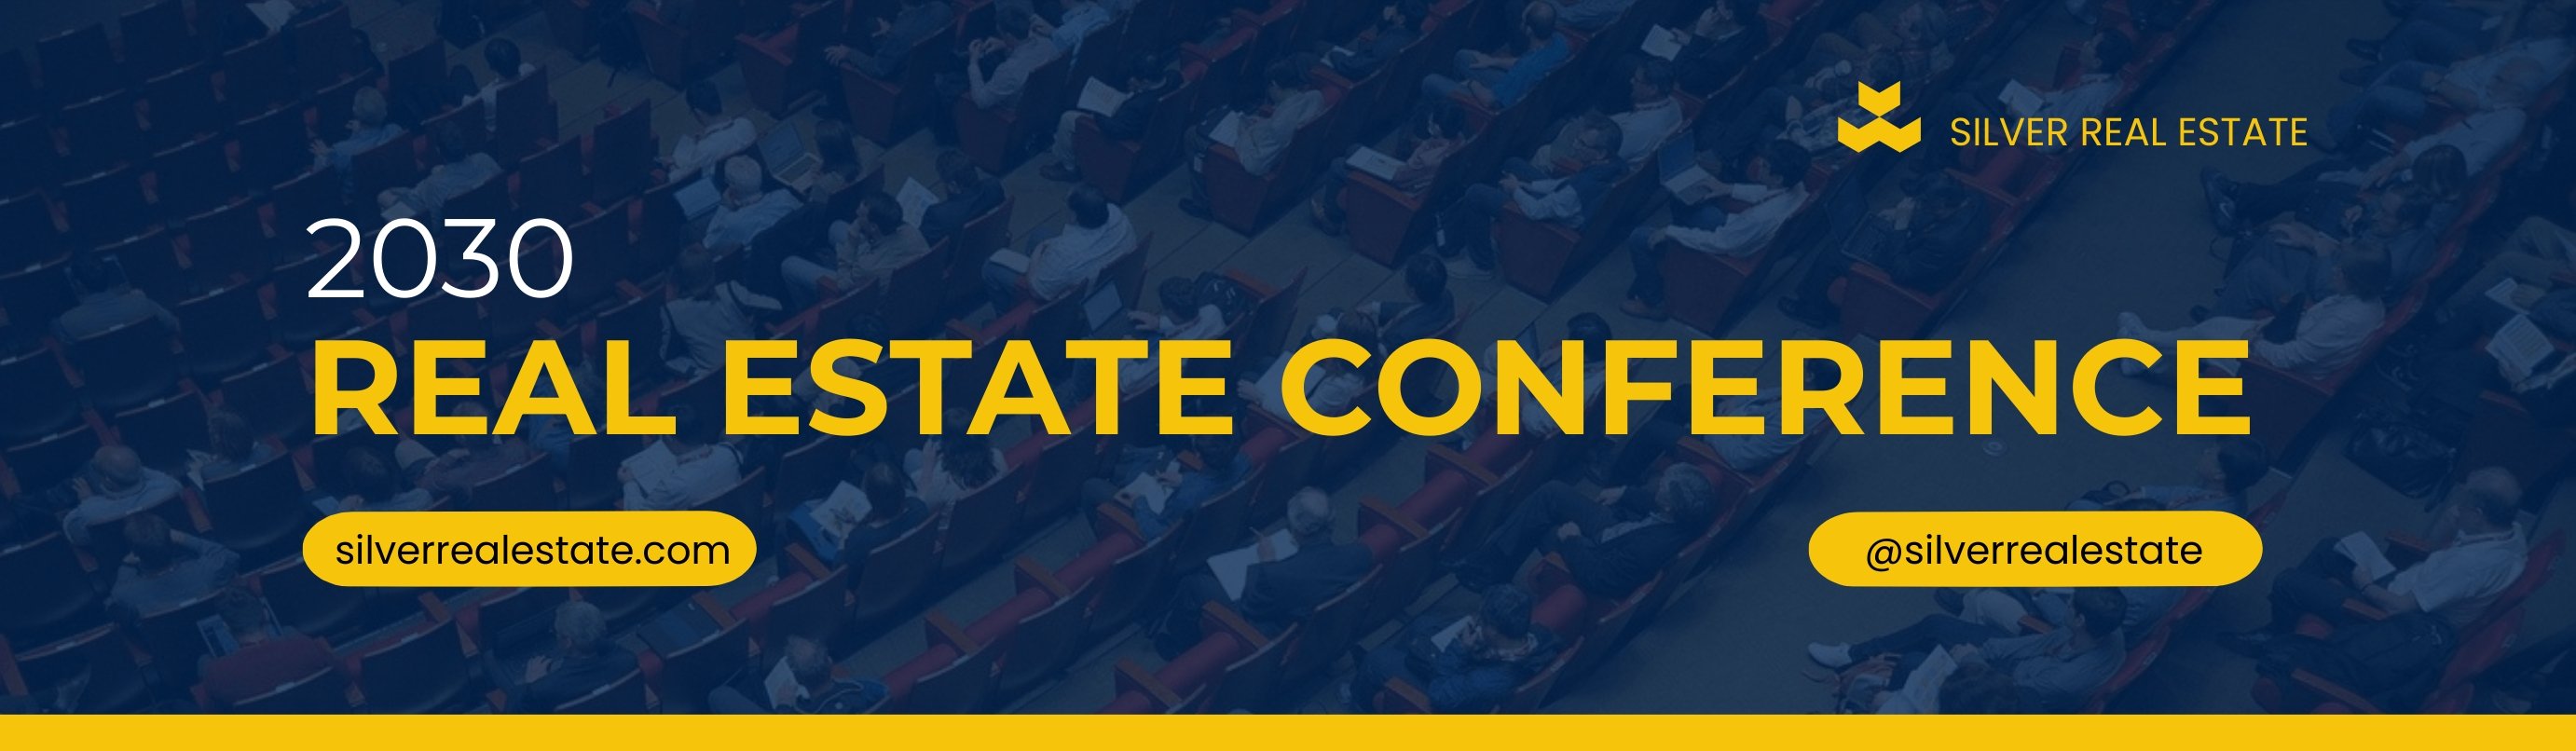 FREE Corporate Conference Template Download in Word, Google Docs